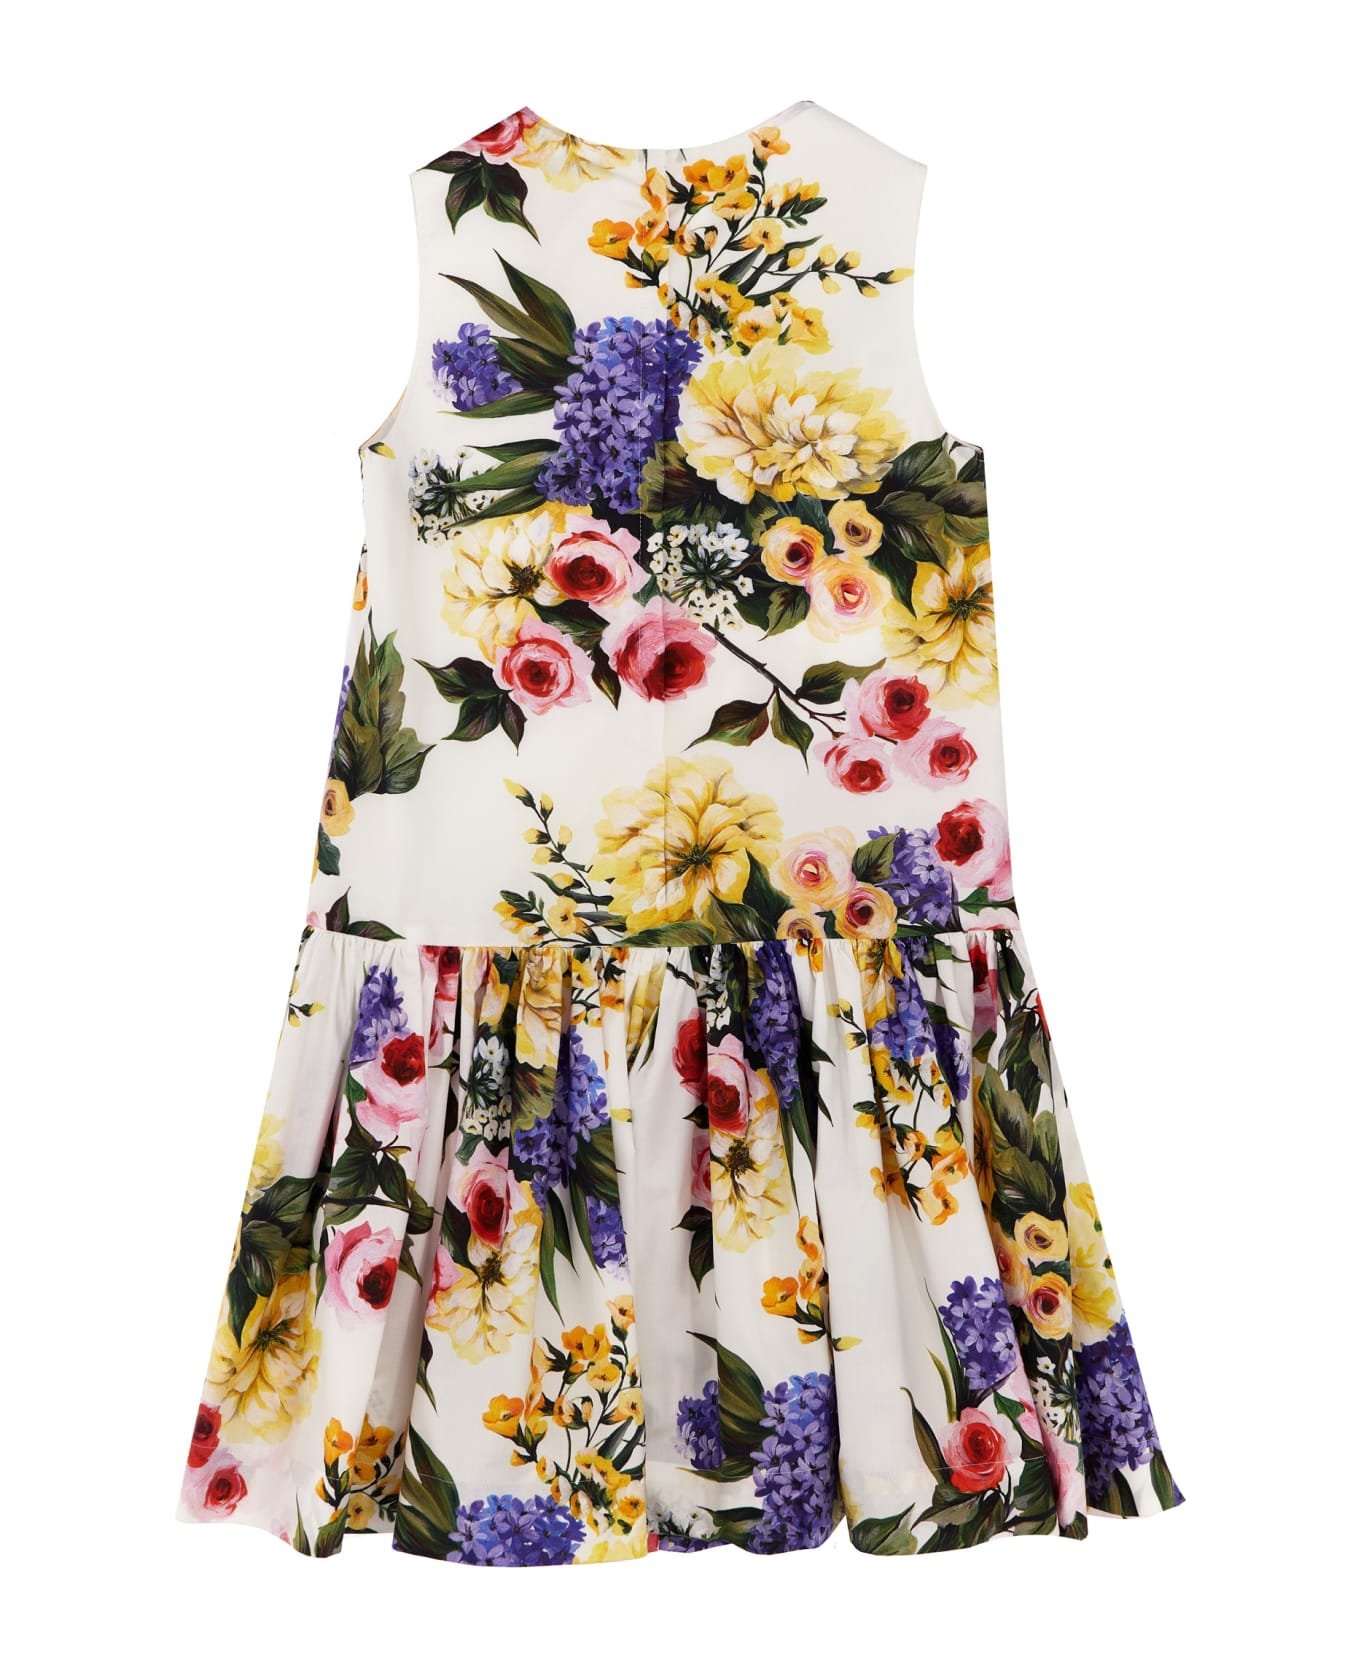 dolce chunky & Gabbana Floral Printed Dress - Multicolor